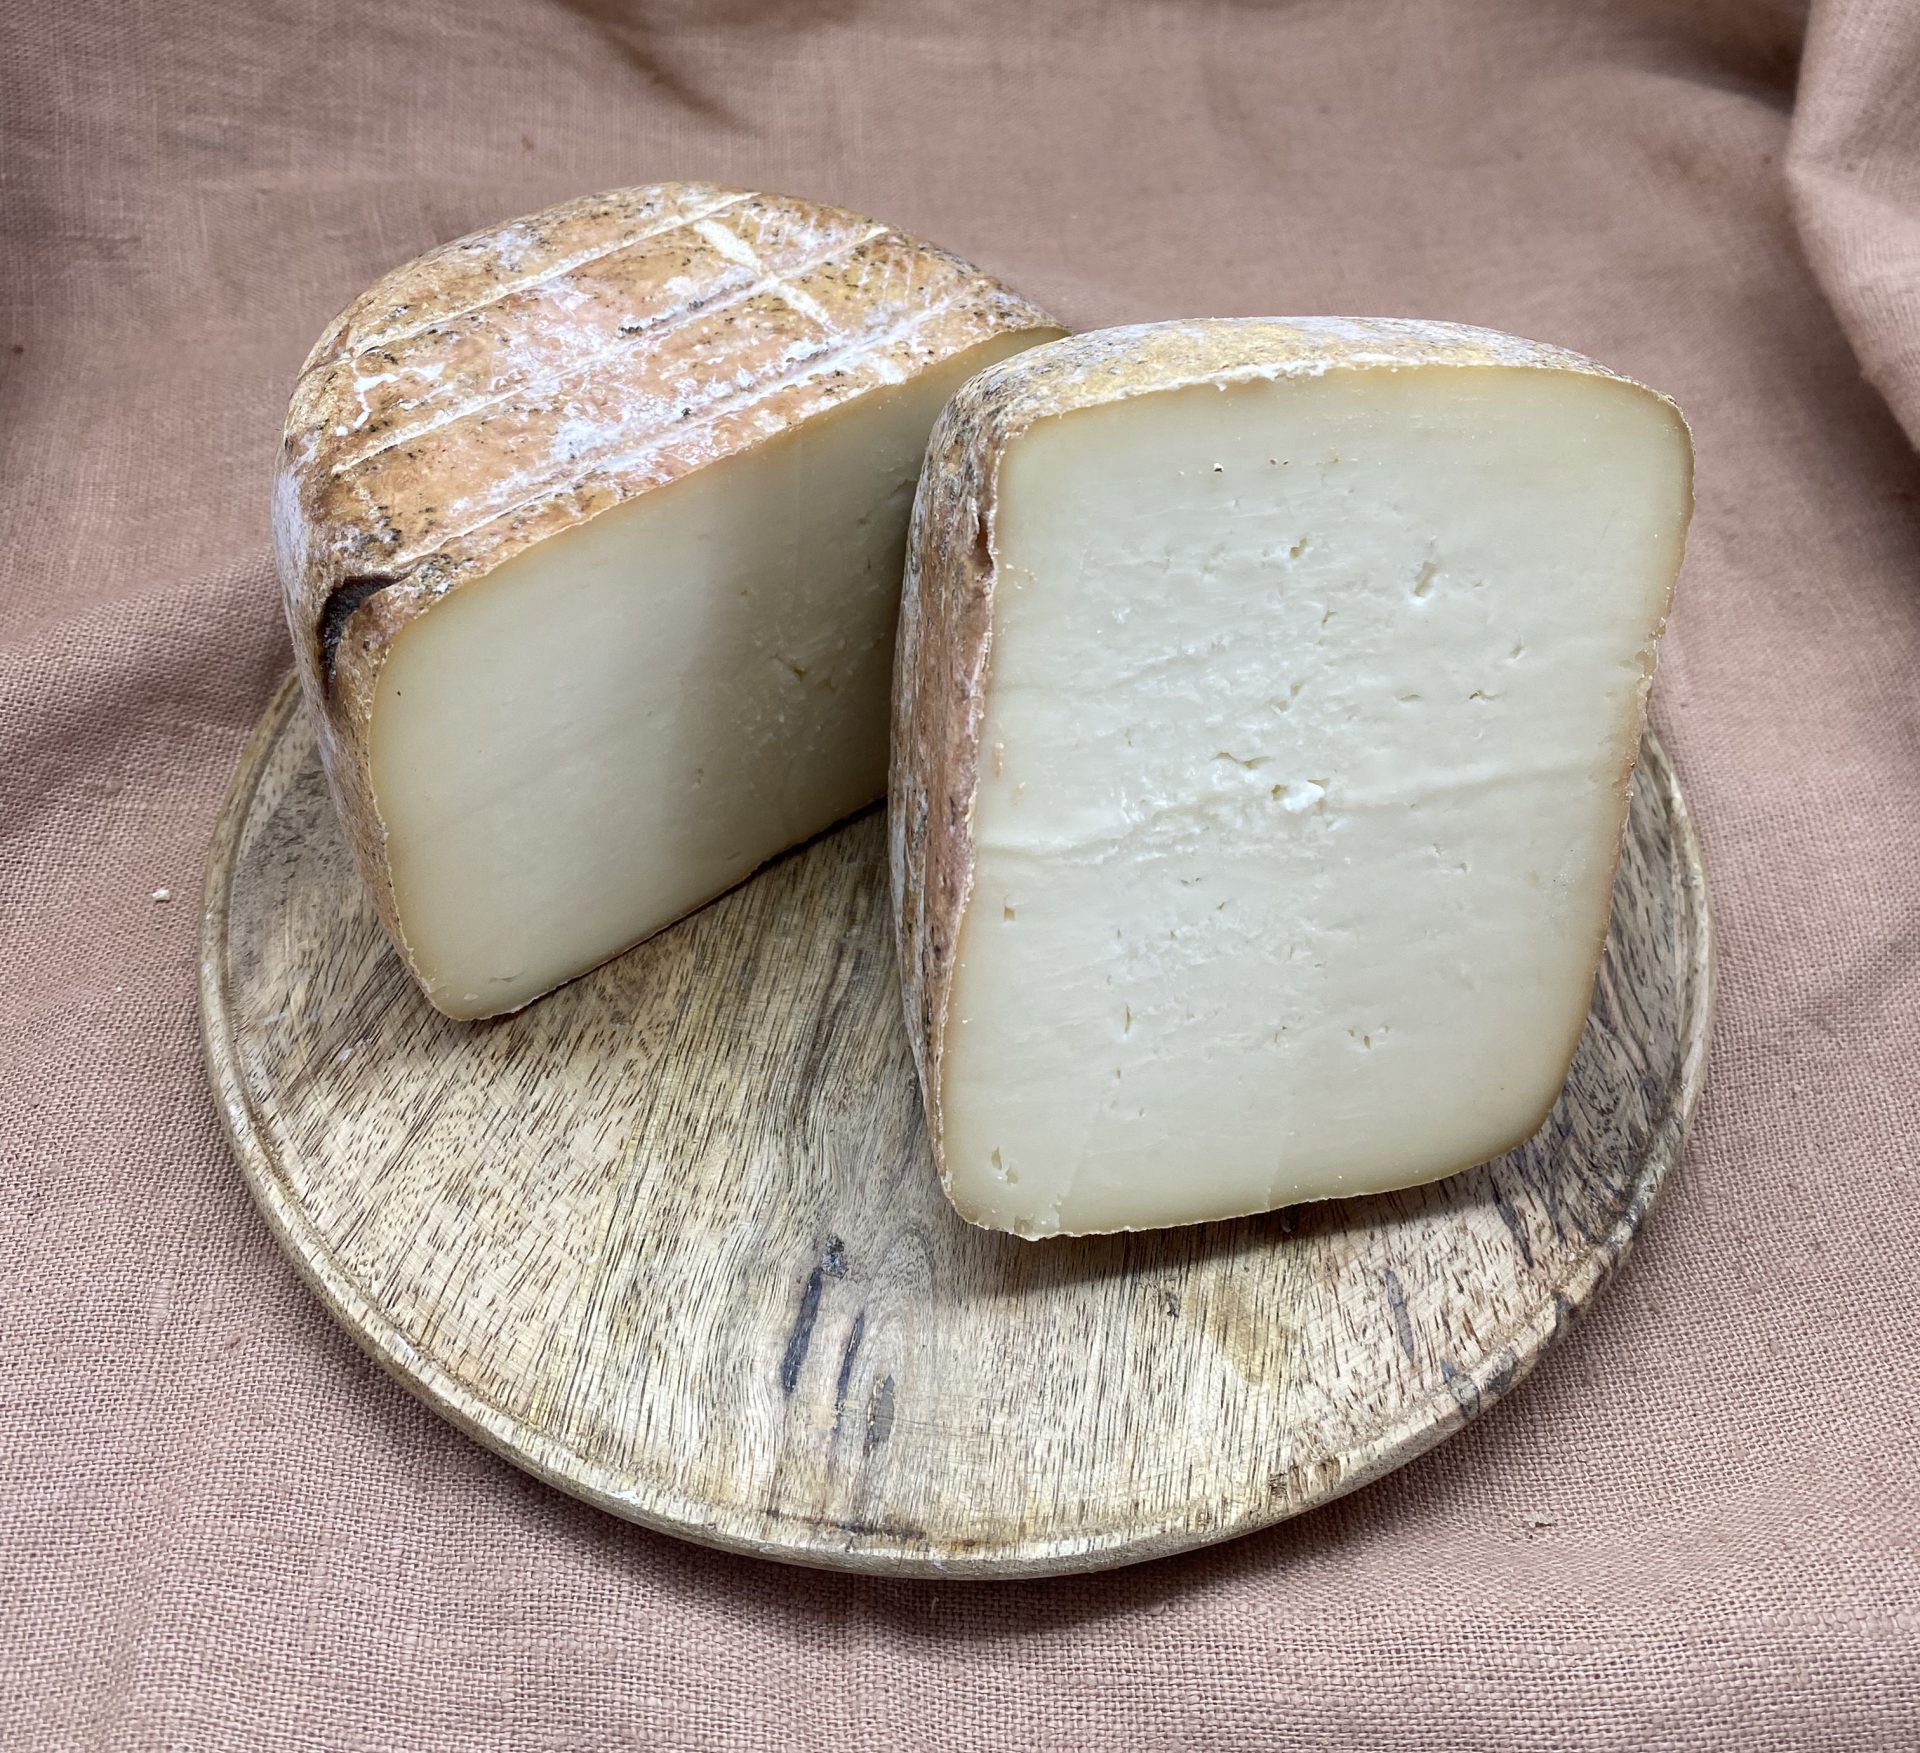 fromages de cocagne img 6841